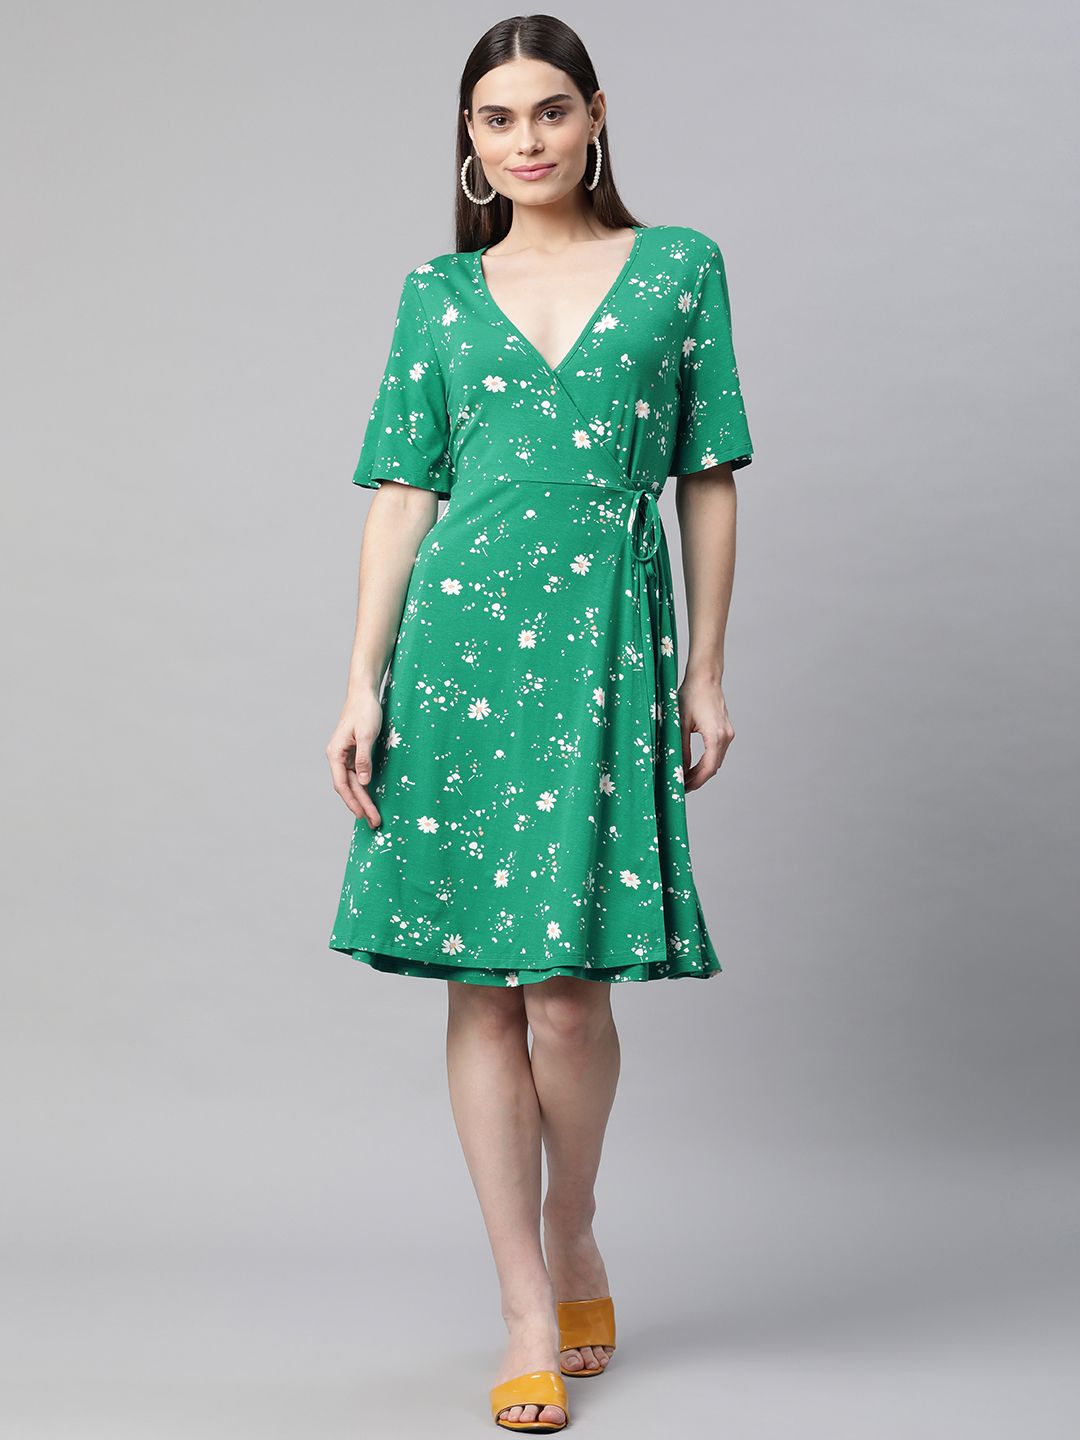 Marks & Spencer Green & White Jersey Floral Print Knee-Length Wrap Dress Price in India